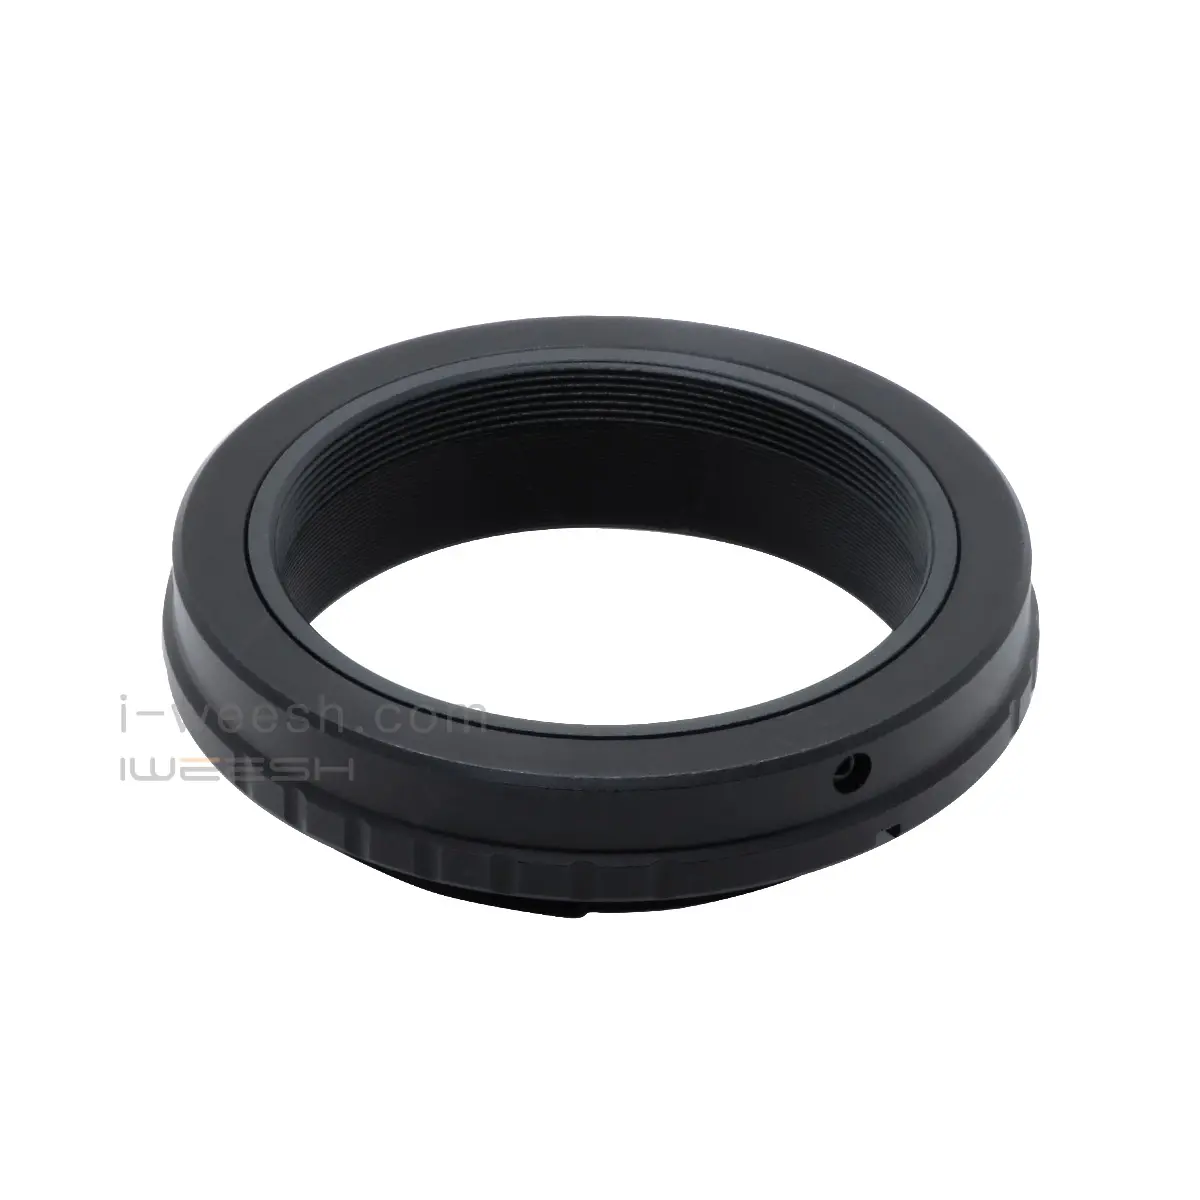 M48*0.75 Mount Adapter Ring Telescope Eyepiece Lens For Canon EOS R Camera Telescope DSLR Adapter T2-EOS R